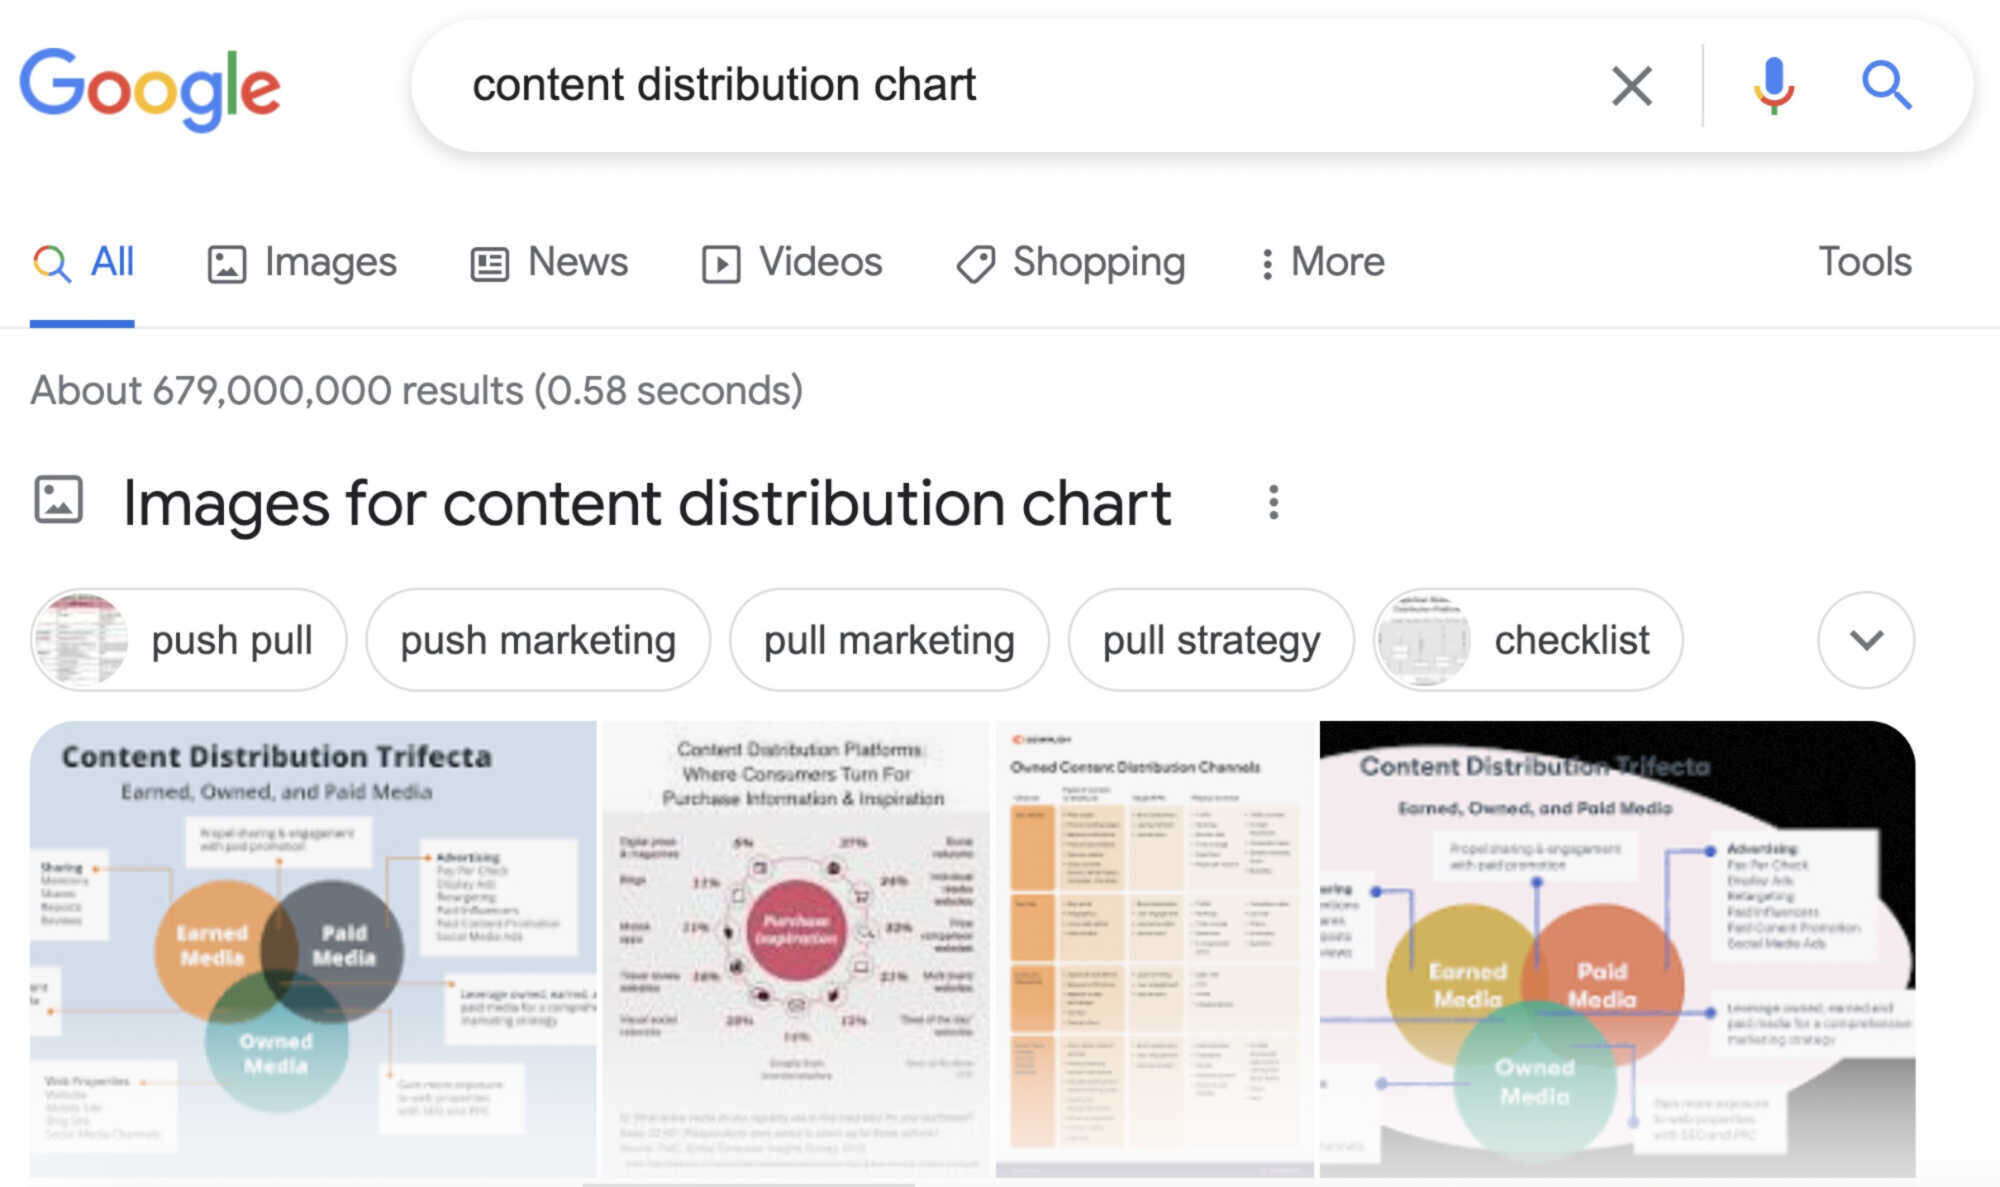 image results for content distribution chart